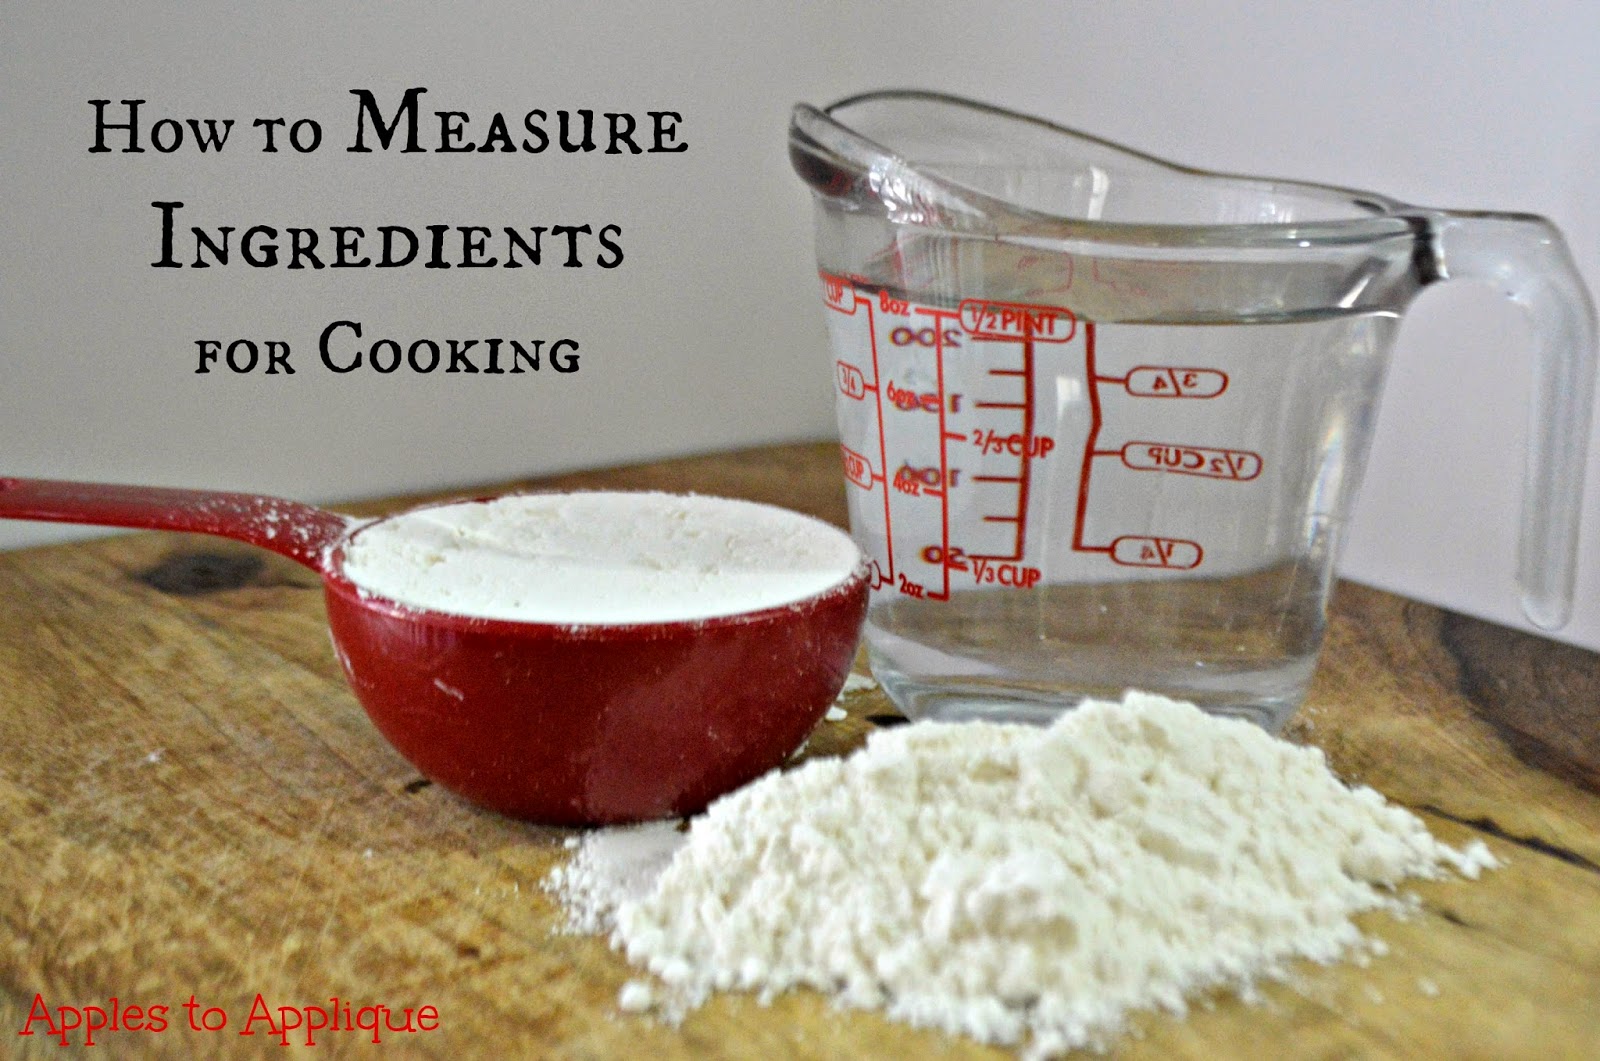 How to Properly Measure Wet and Dry Ingredients, Baking 101